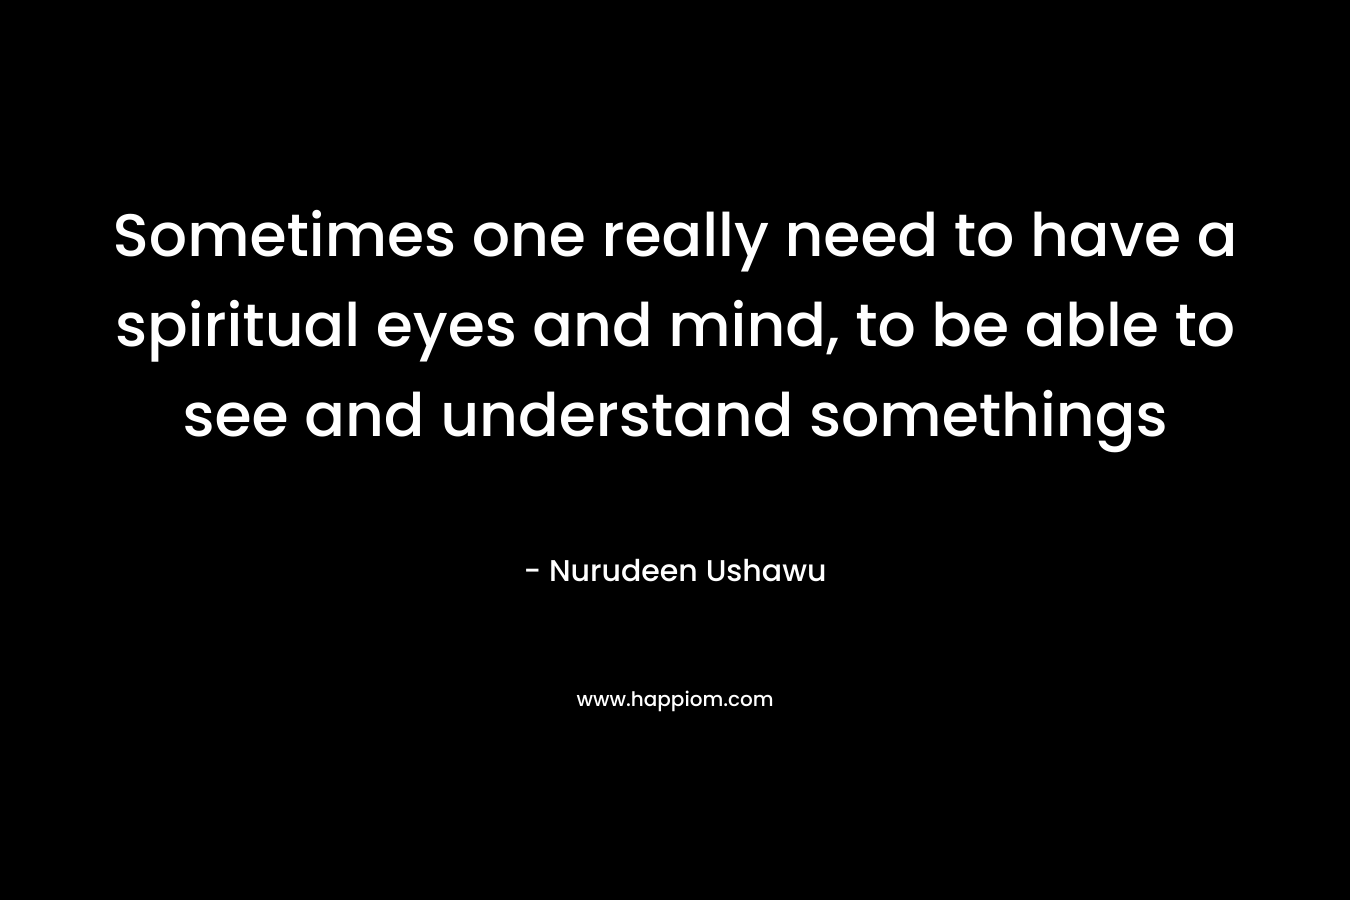 Sometimes one really need to have a spiritual eyes and mind, to be able to see and understand somethings